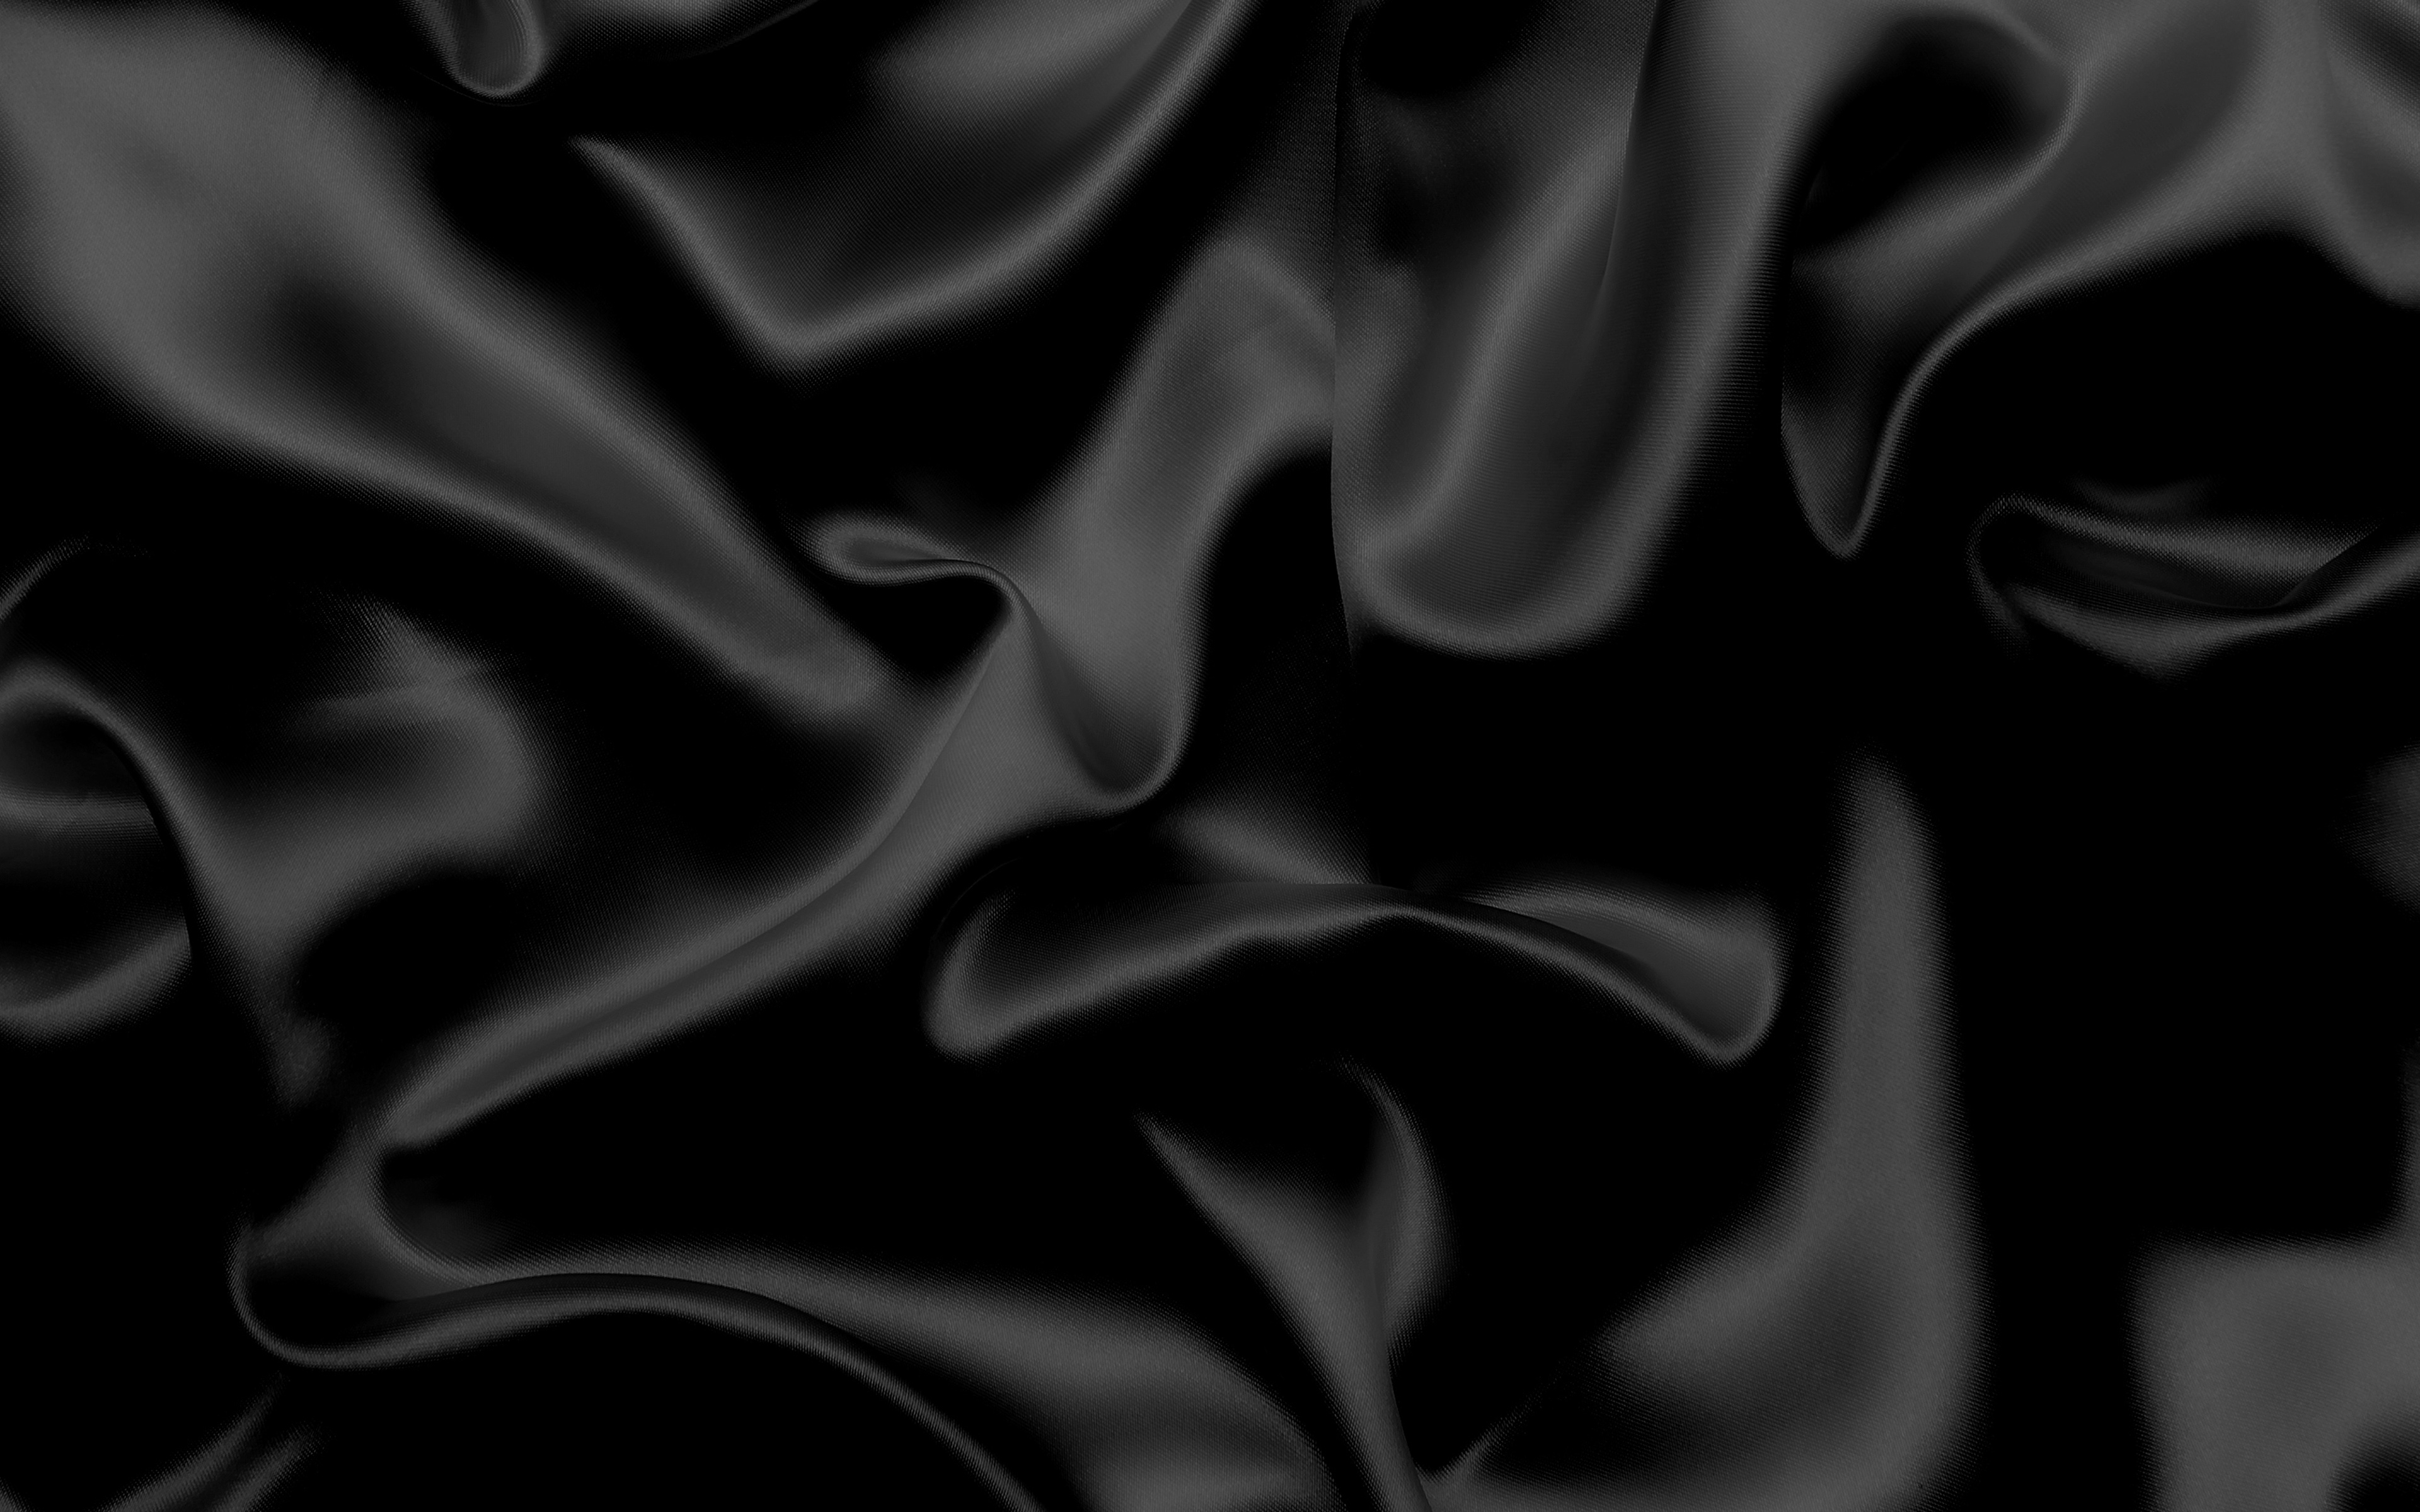 Download wallpaper black silk texture, 4k, black waves silk background, silk waves texture, silk background, black fabric texture, black satin texture for desktop with resolution 3840x2400. High Quality HD picture wallpaper